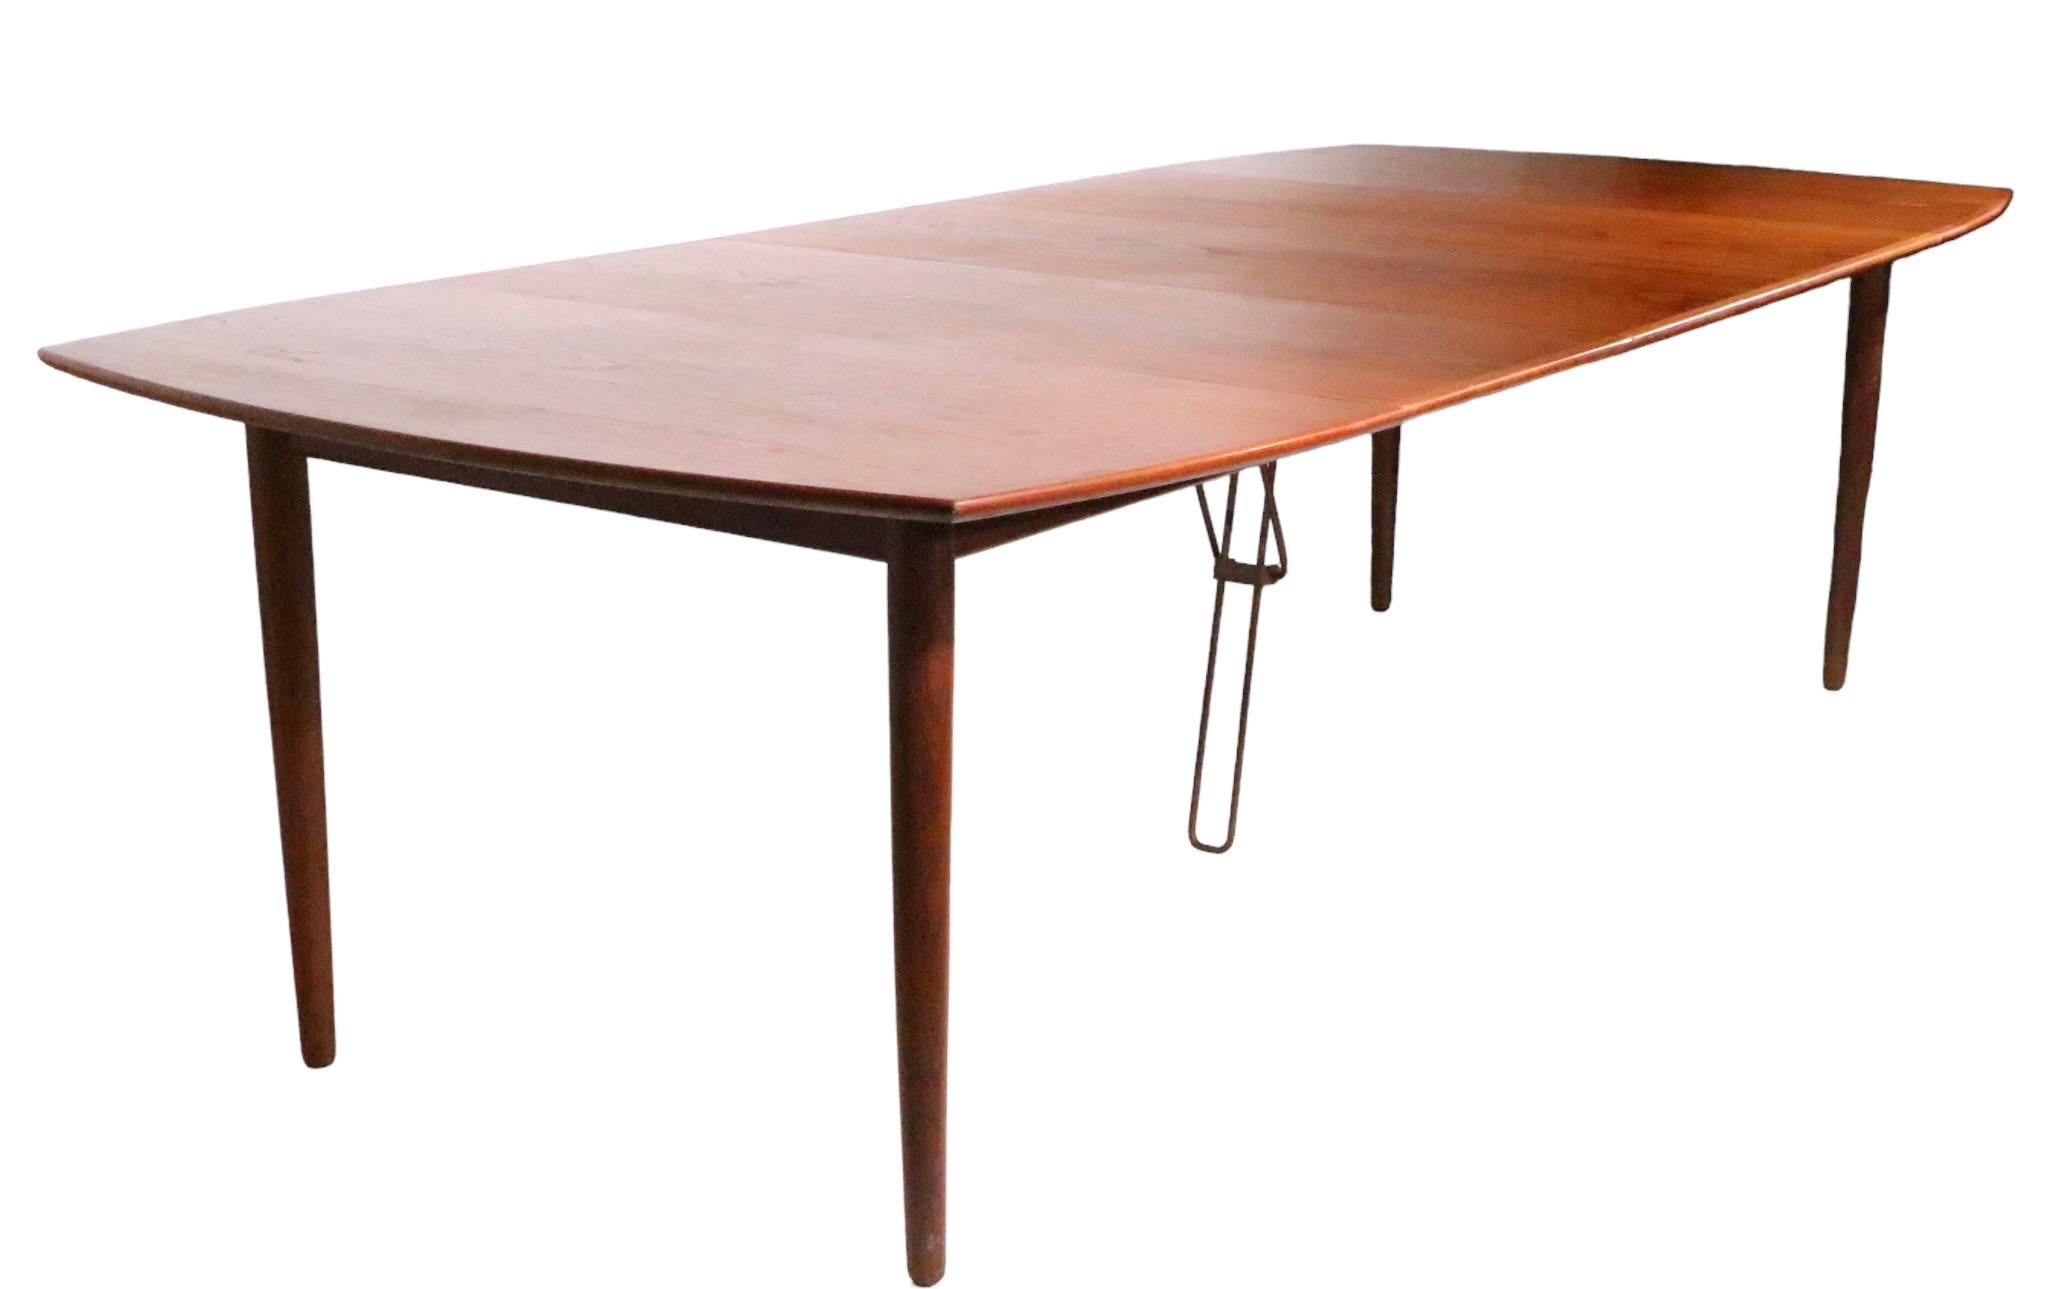 Danish Mid Century Modern Teak Extension  Dining Table by H W Klein  c 1950's For Sale 8